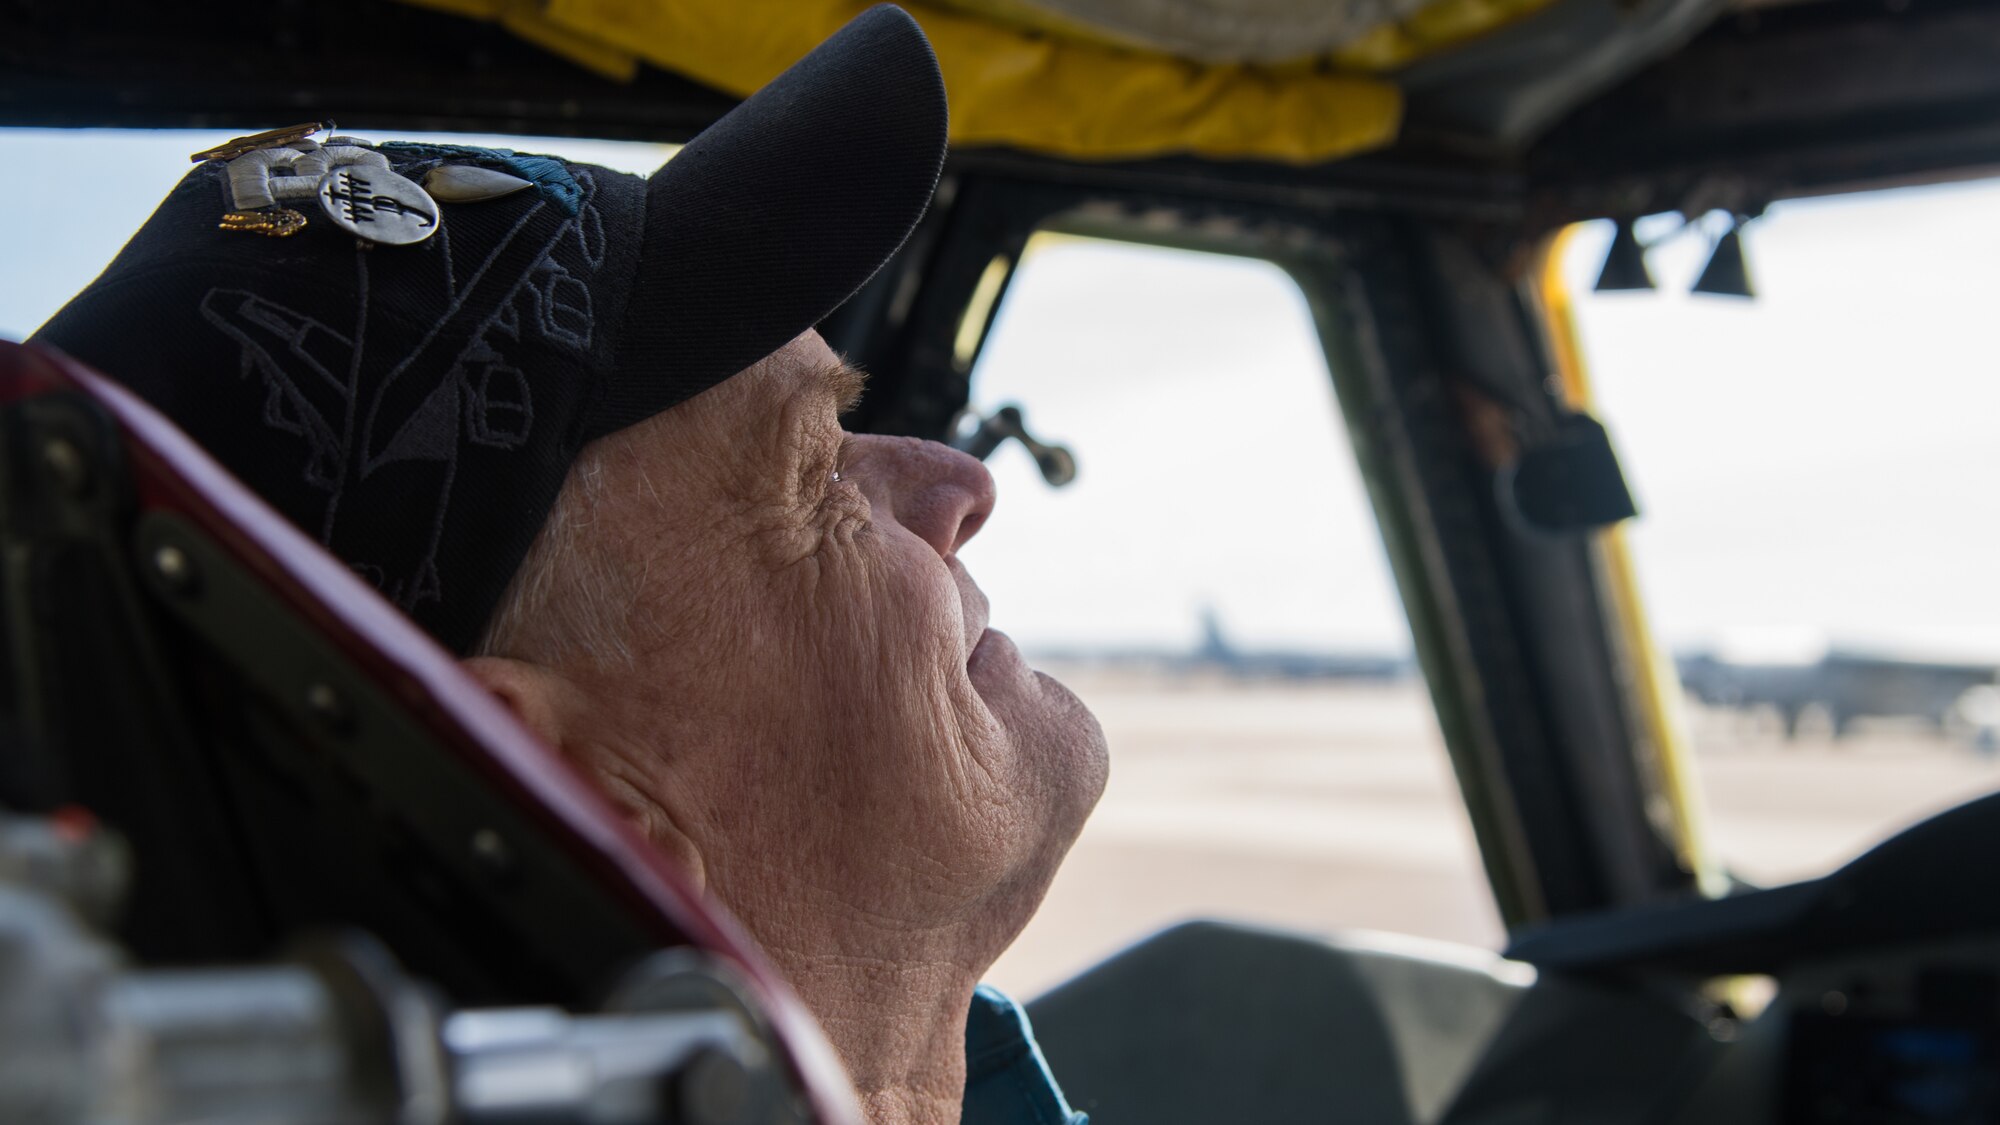 Retired Staff Sgt. Mark James, former B-52H Stratofortress crew chief, reunites with his former aircraft at Barksdale Air Force Base, La., Nov 13, 2019. James began his career at Barksdale in 1973 and retired from the Air Force in 1991. (U.S. Air Force photo by Airman 1st Class Jacob B. Wrightsman)